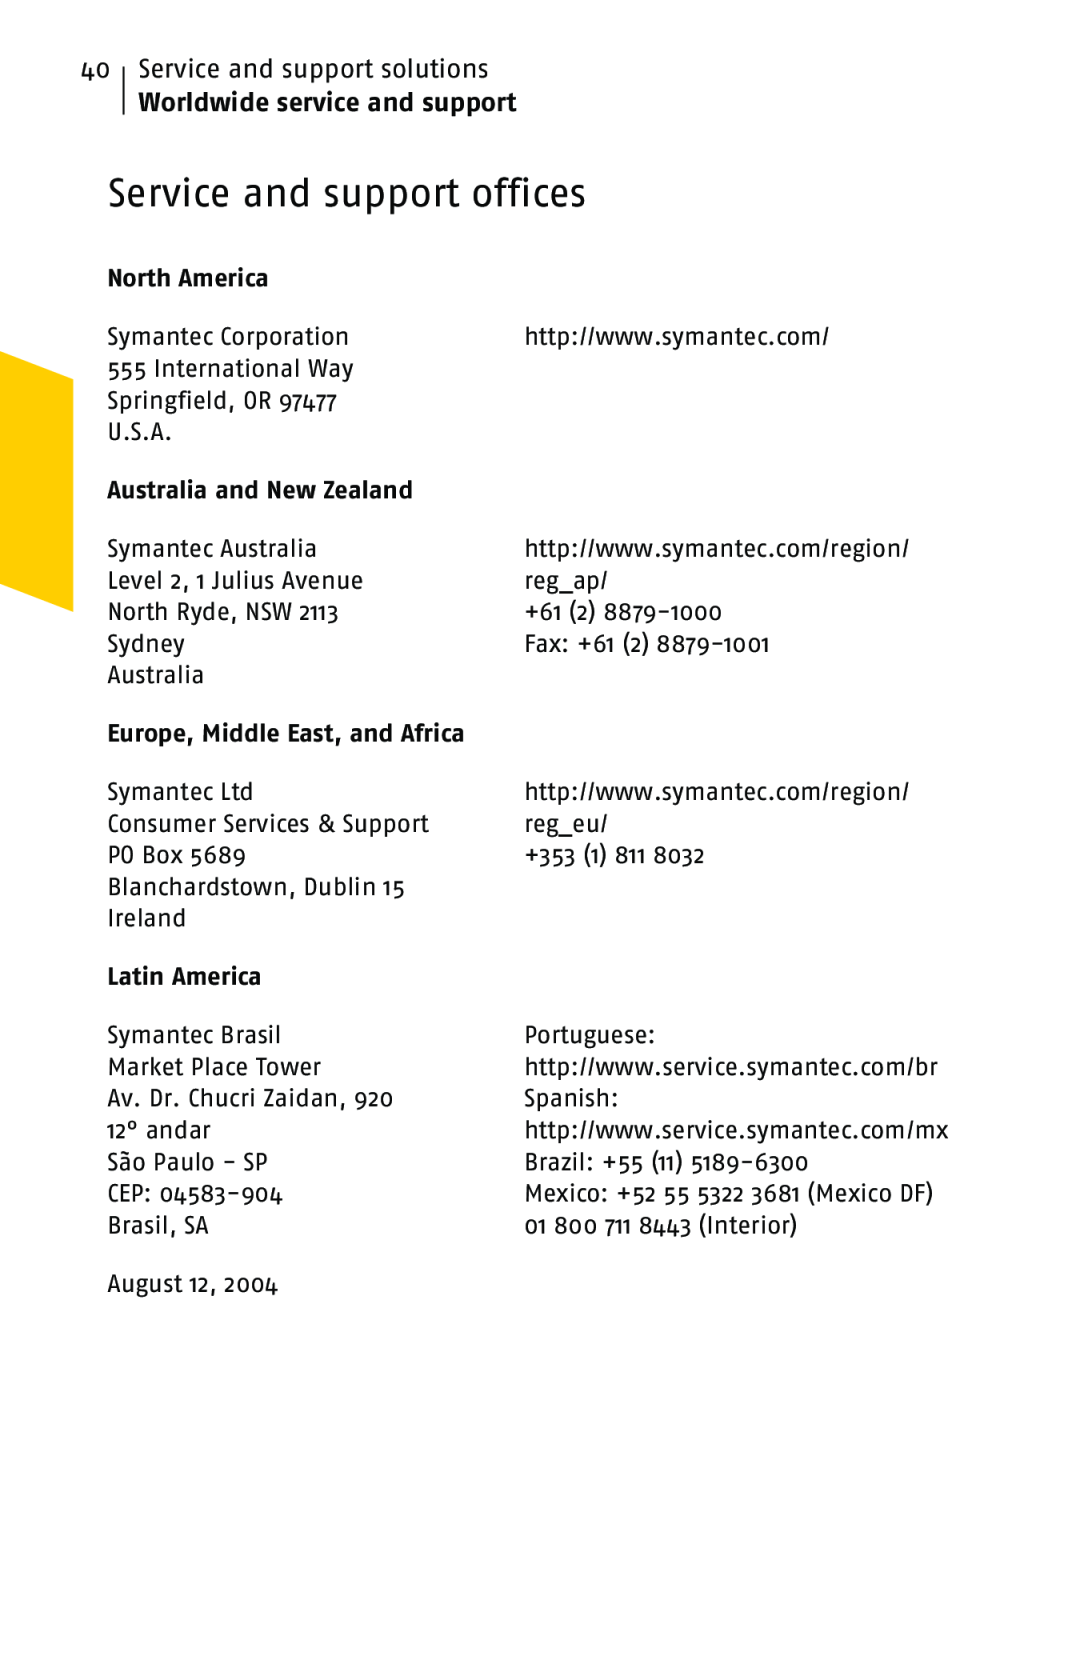 Symantec 10 Service and support offices, 40Service and support solutions, Worldwide service and support, North America 